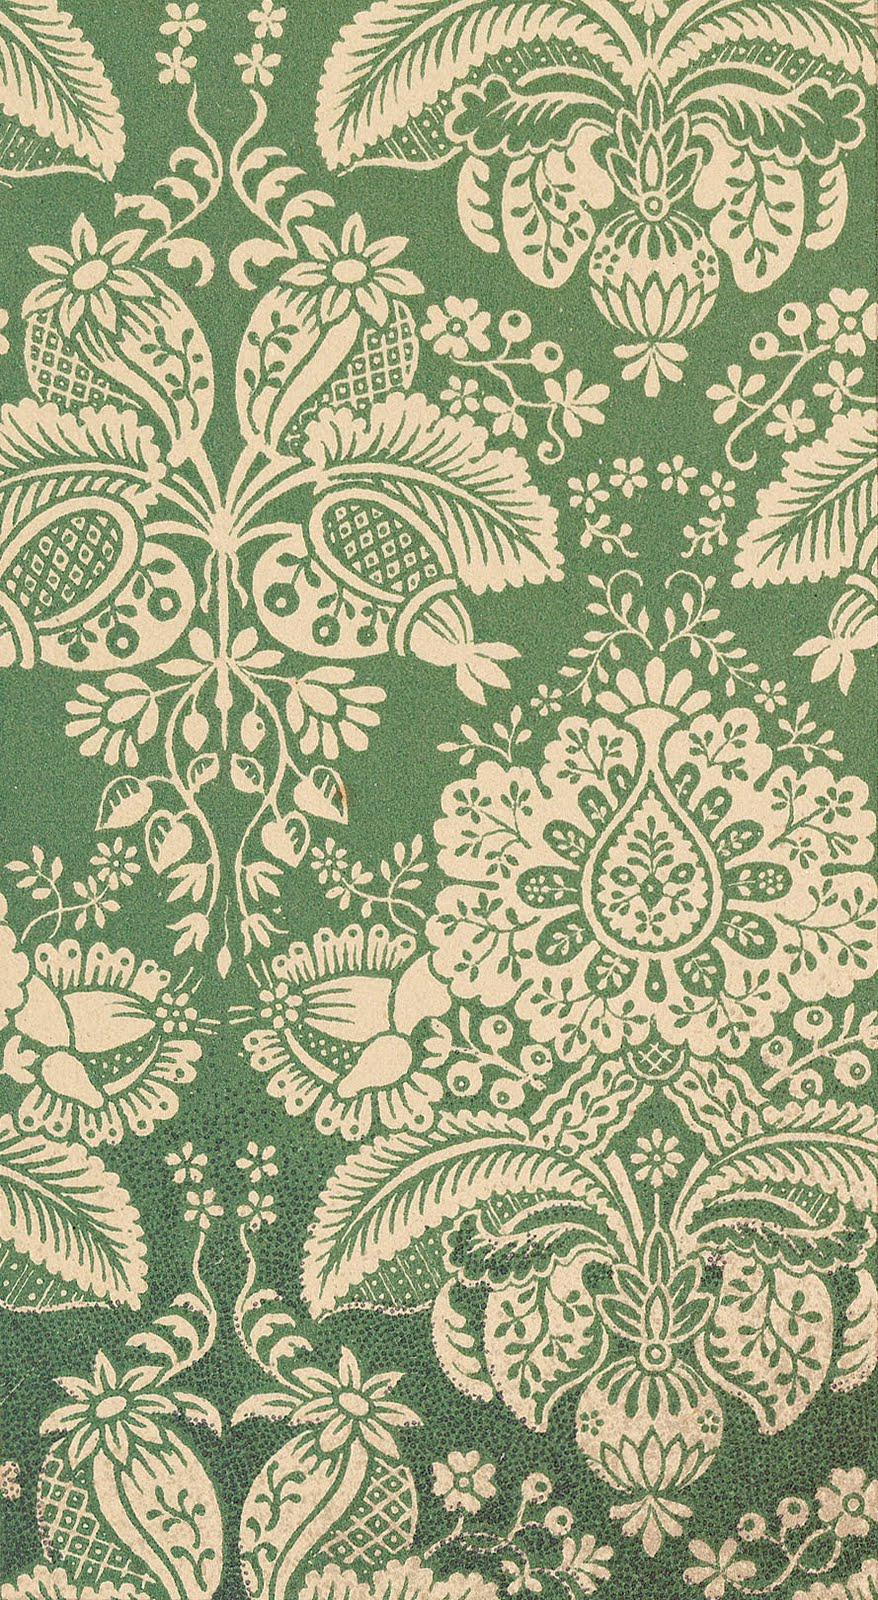 rococo's modern life: 16 and 18th Century Patterns